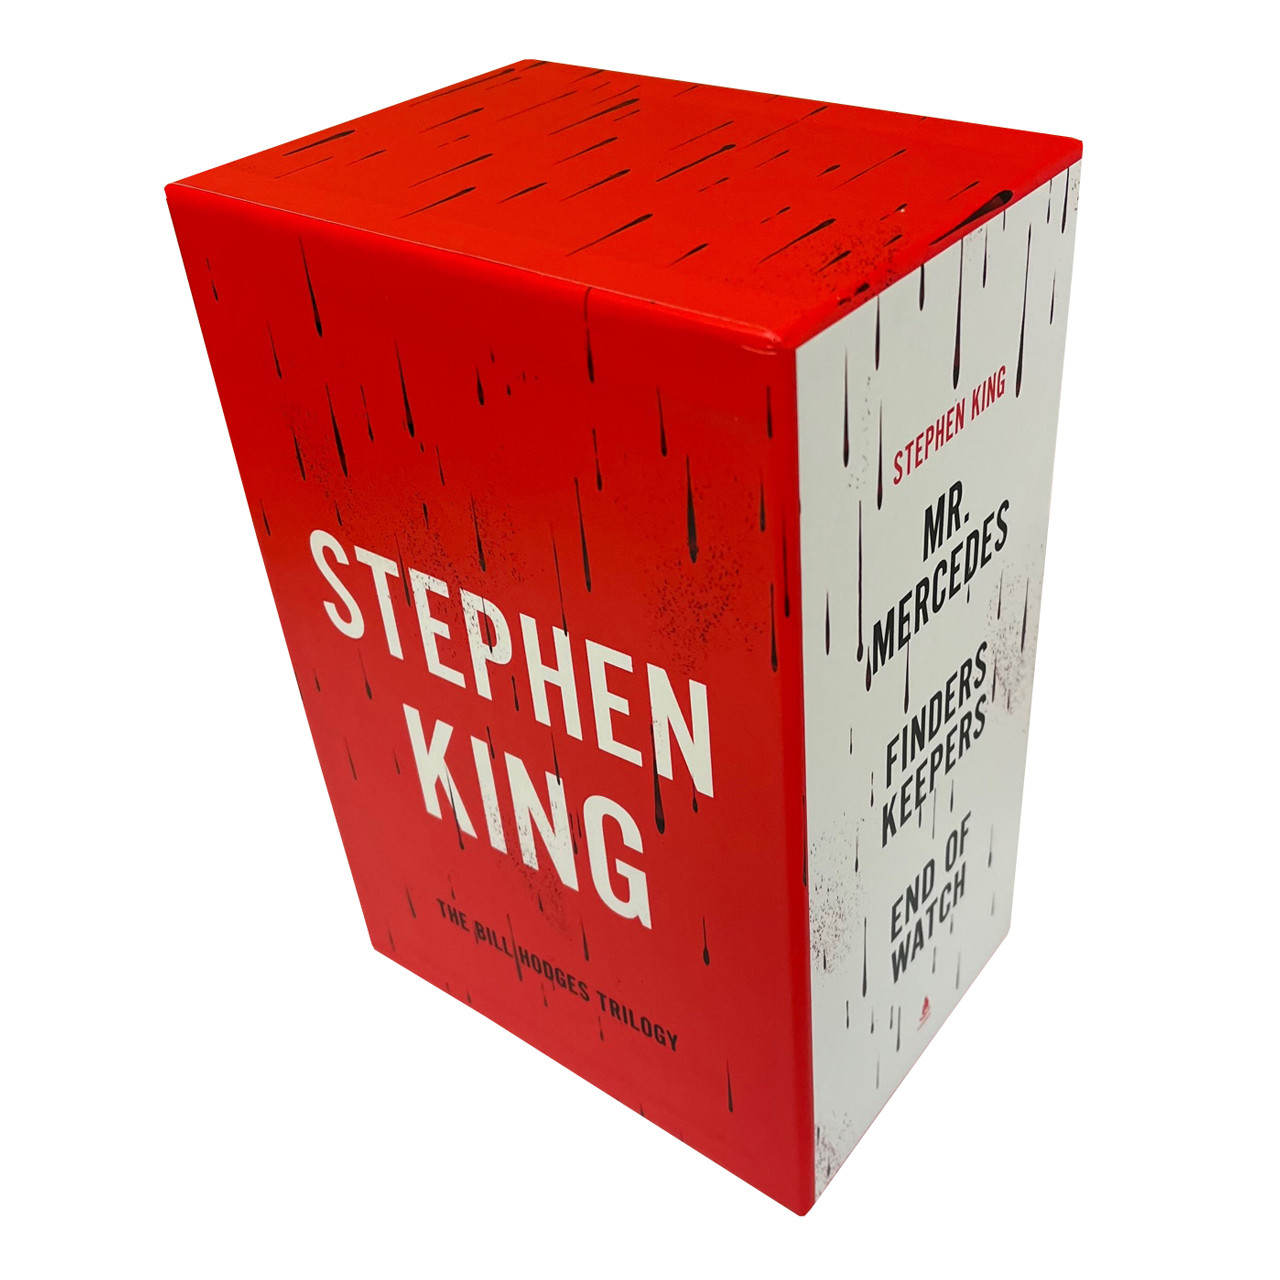 Stephen King "The Bill Hodges Trilogy" Slipcased Boxed Set w/Signed "Finders Keepers" [Very Fine]